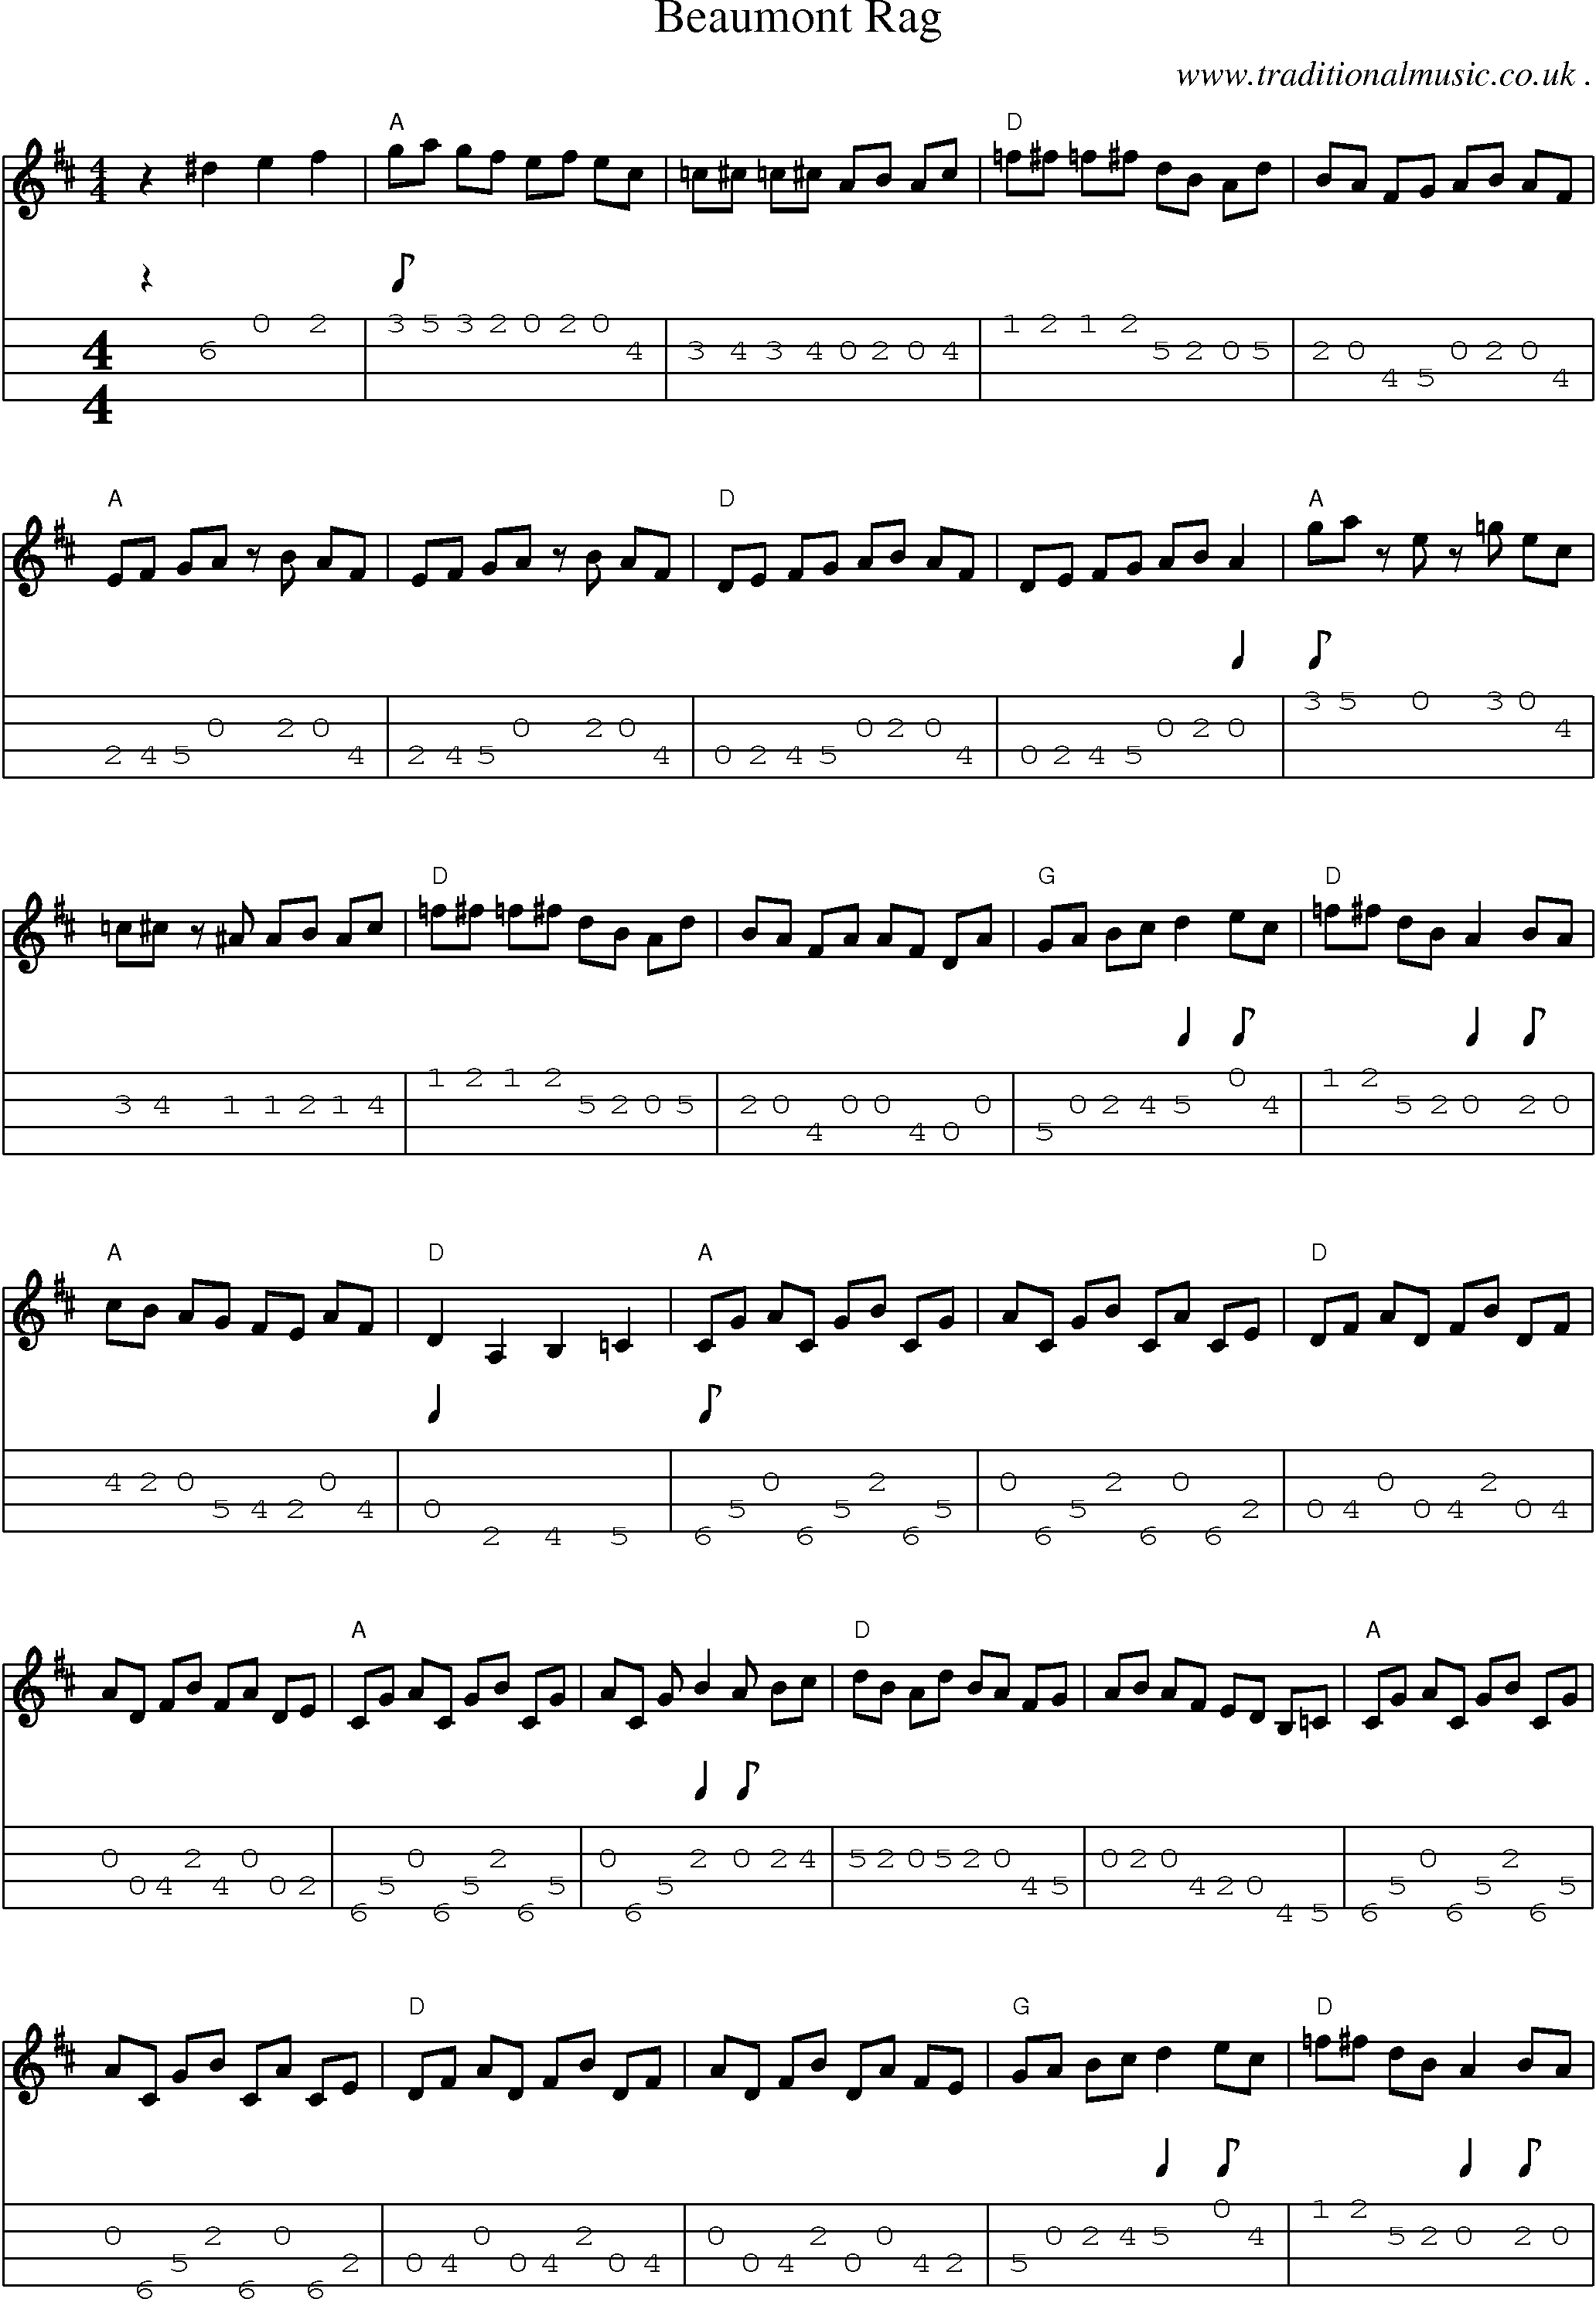 Music Score and Mandolin Tabs for Beaumont Rag